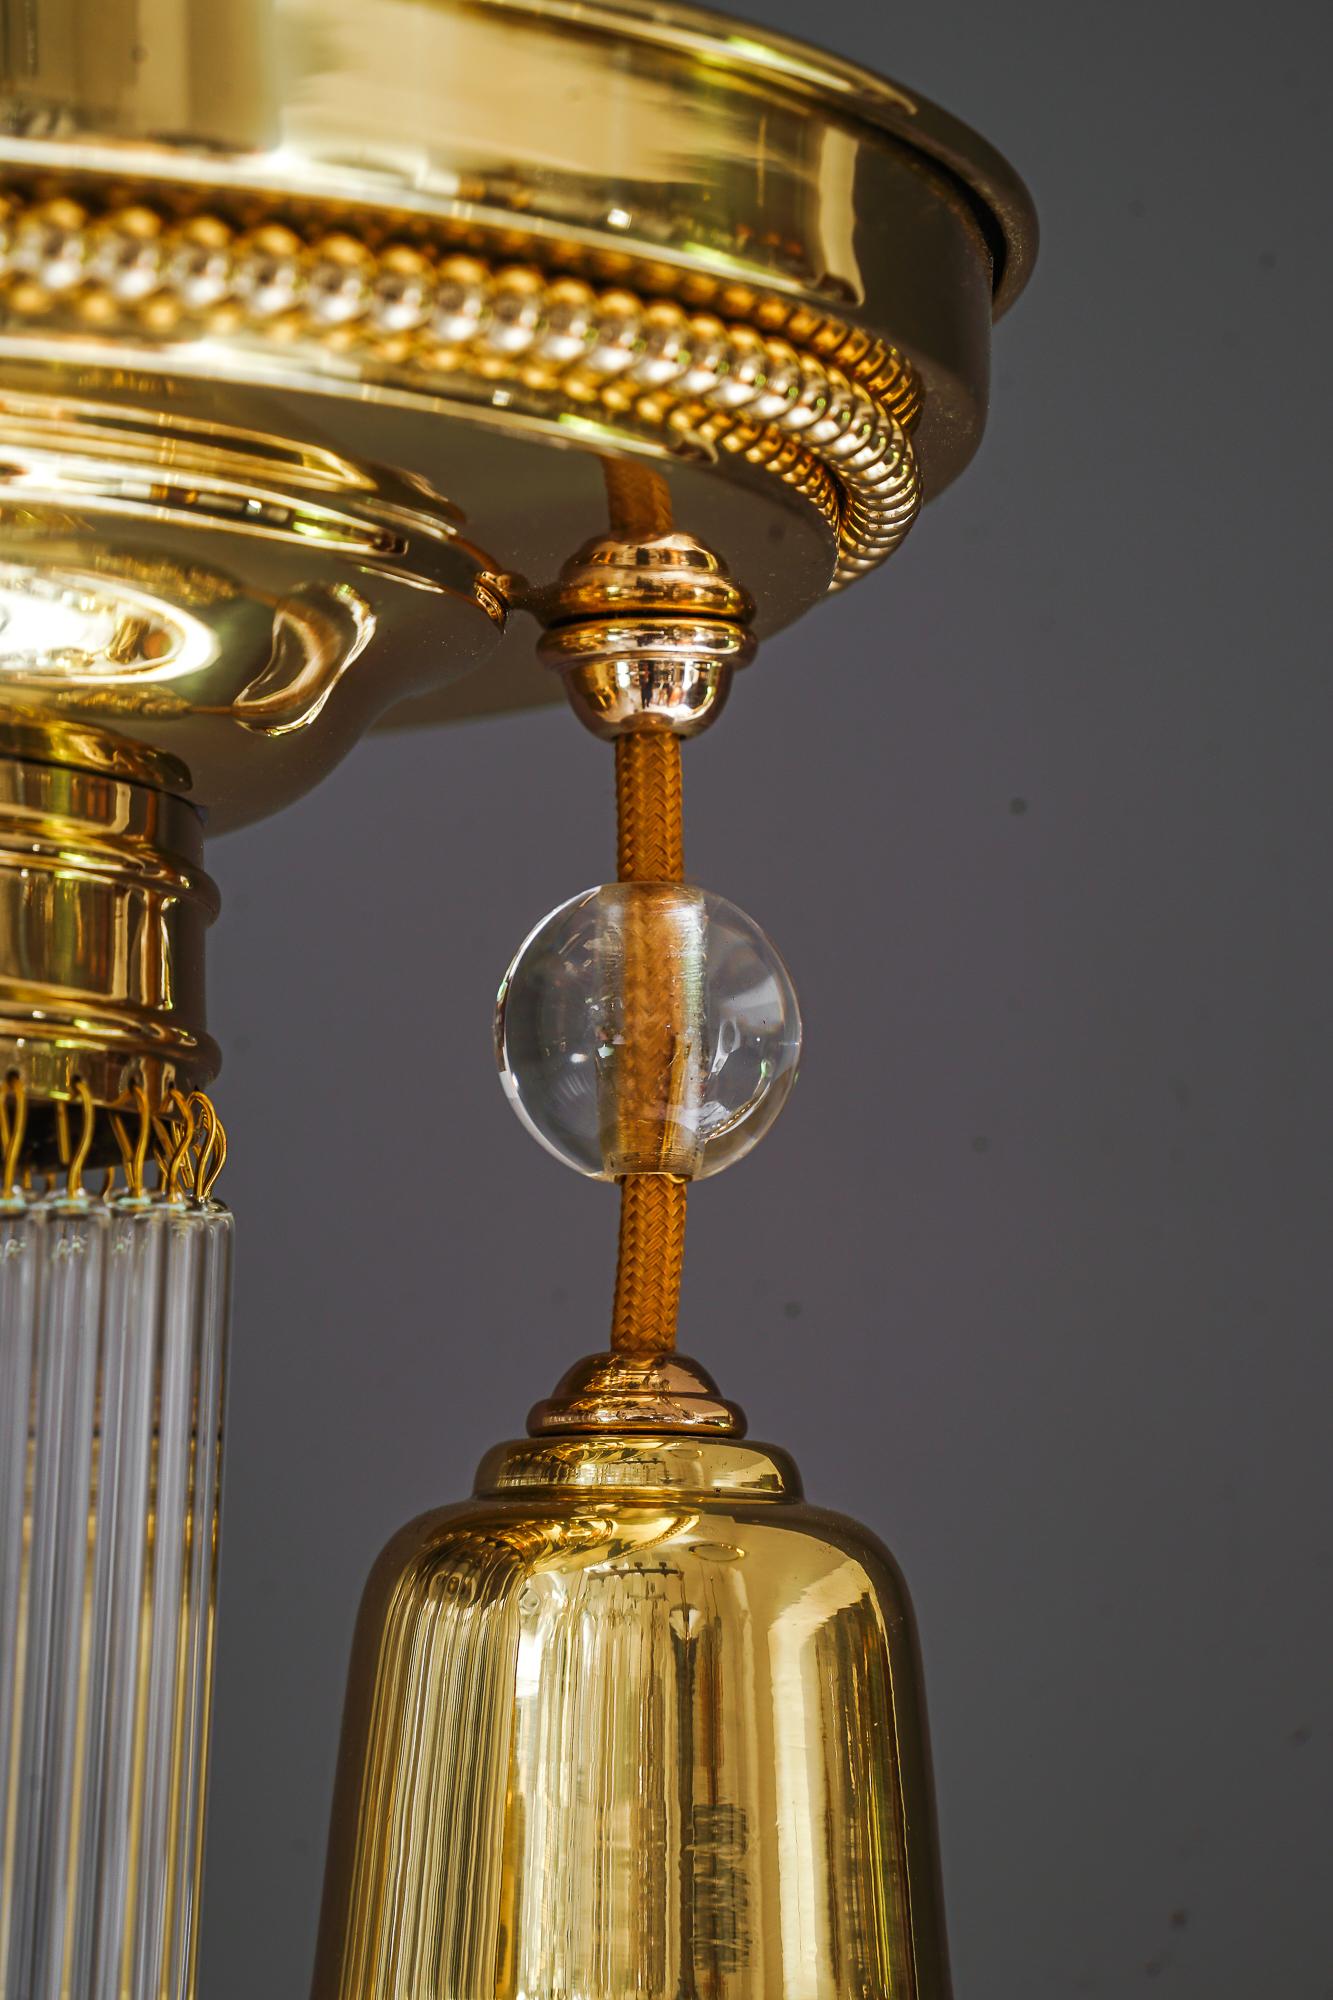 Early 20th Century Art Deco Ceiling Lamp with Glass Sticks, Vienna, Around 1920s